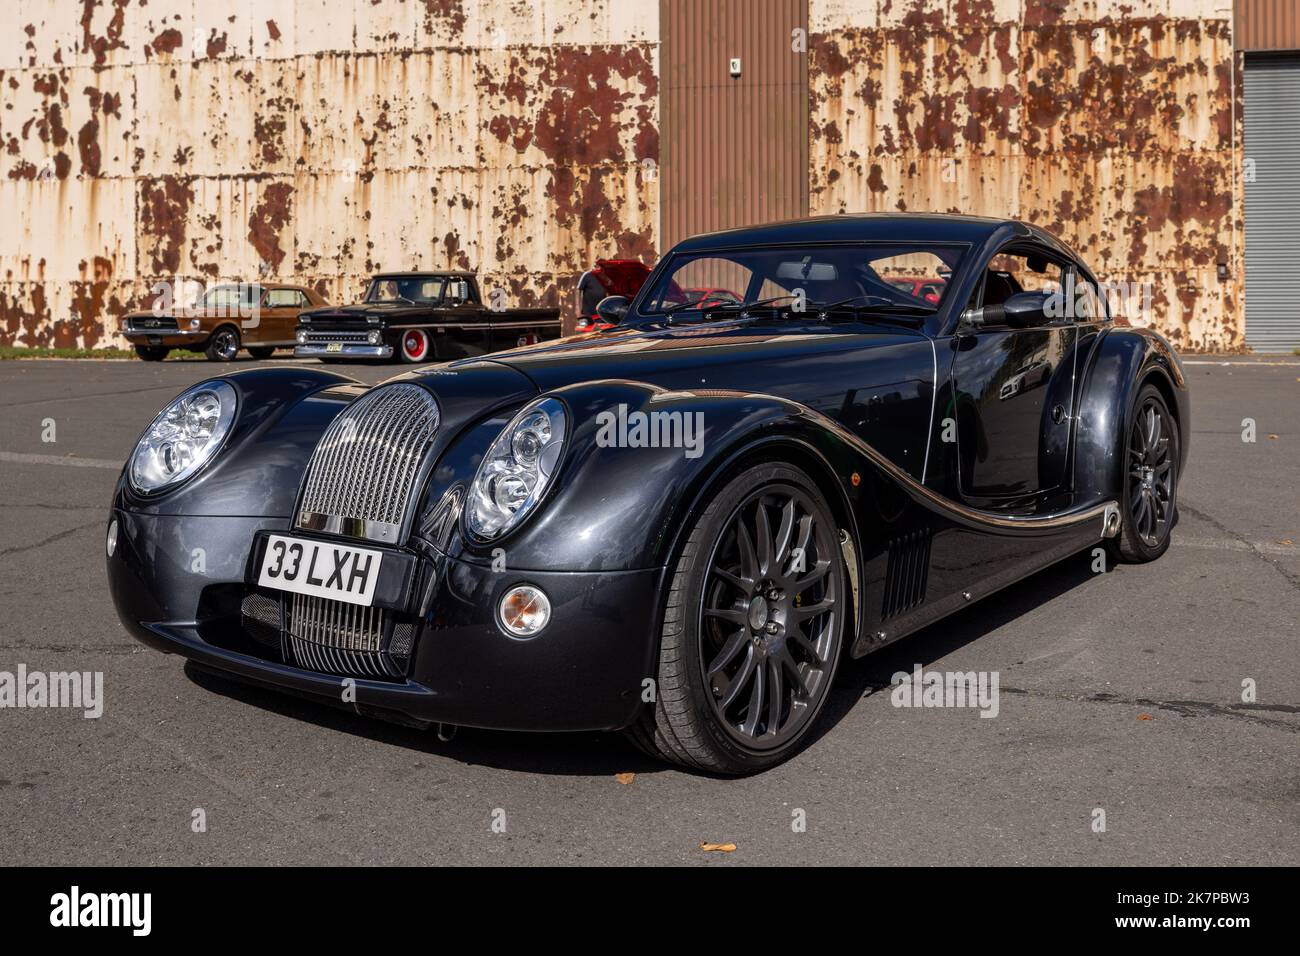 2009 Morgan AeroMax ‘33 LXH’ on display at the Poster Cars & Supercars Assembly at the Bicester Heritage Centre on the 24th September 2022 Stock Photo